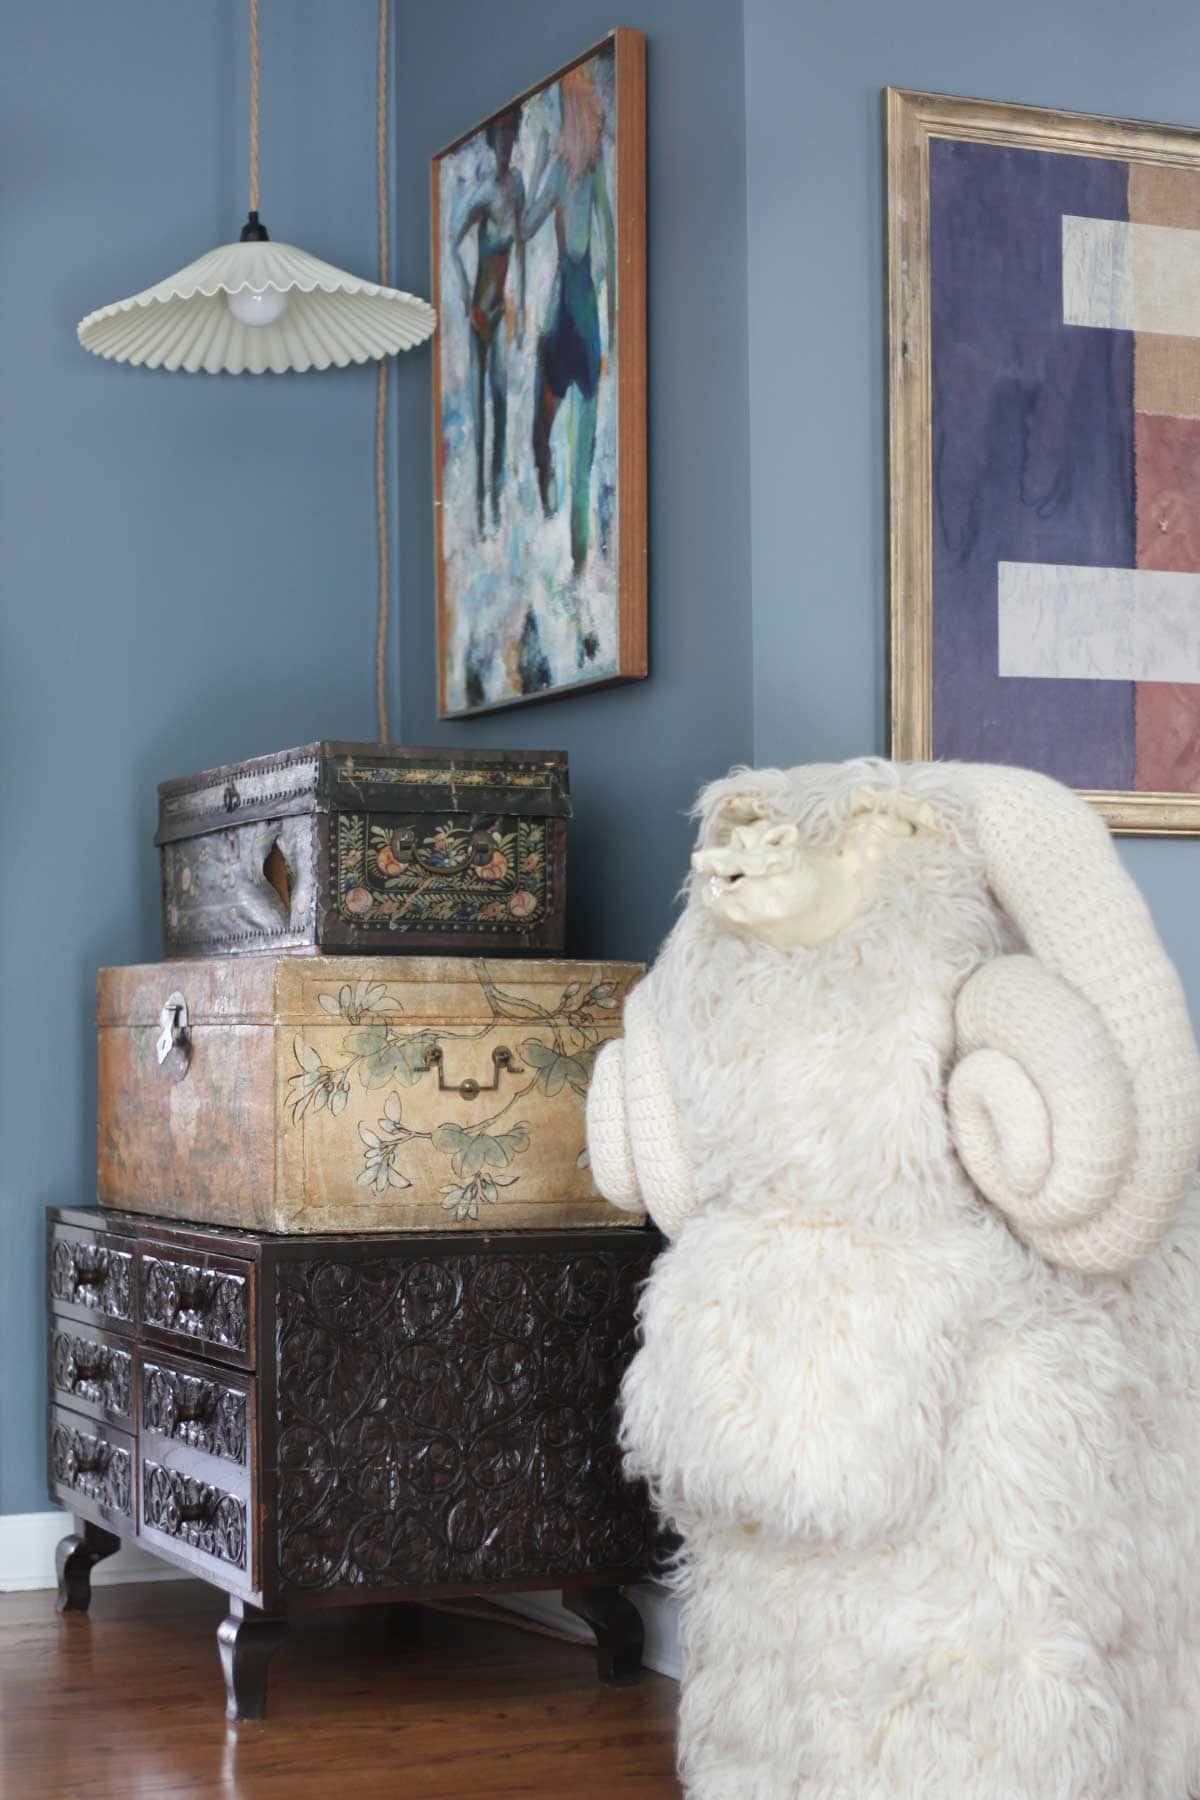 Farrow & Ball De Nimes paint in eclectic modern living room with vintage decor finds